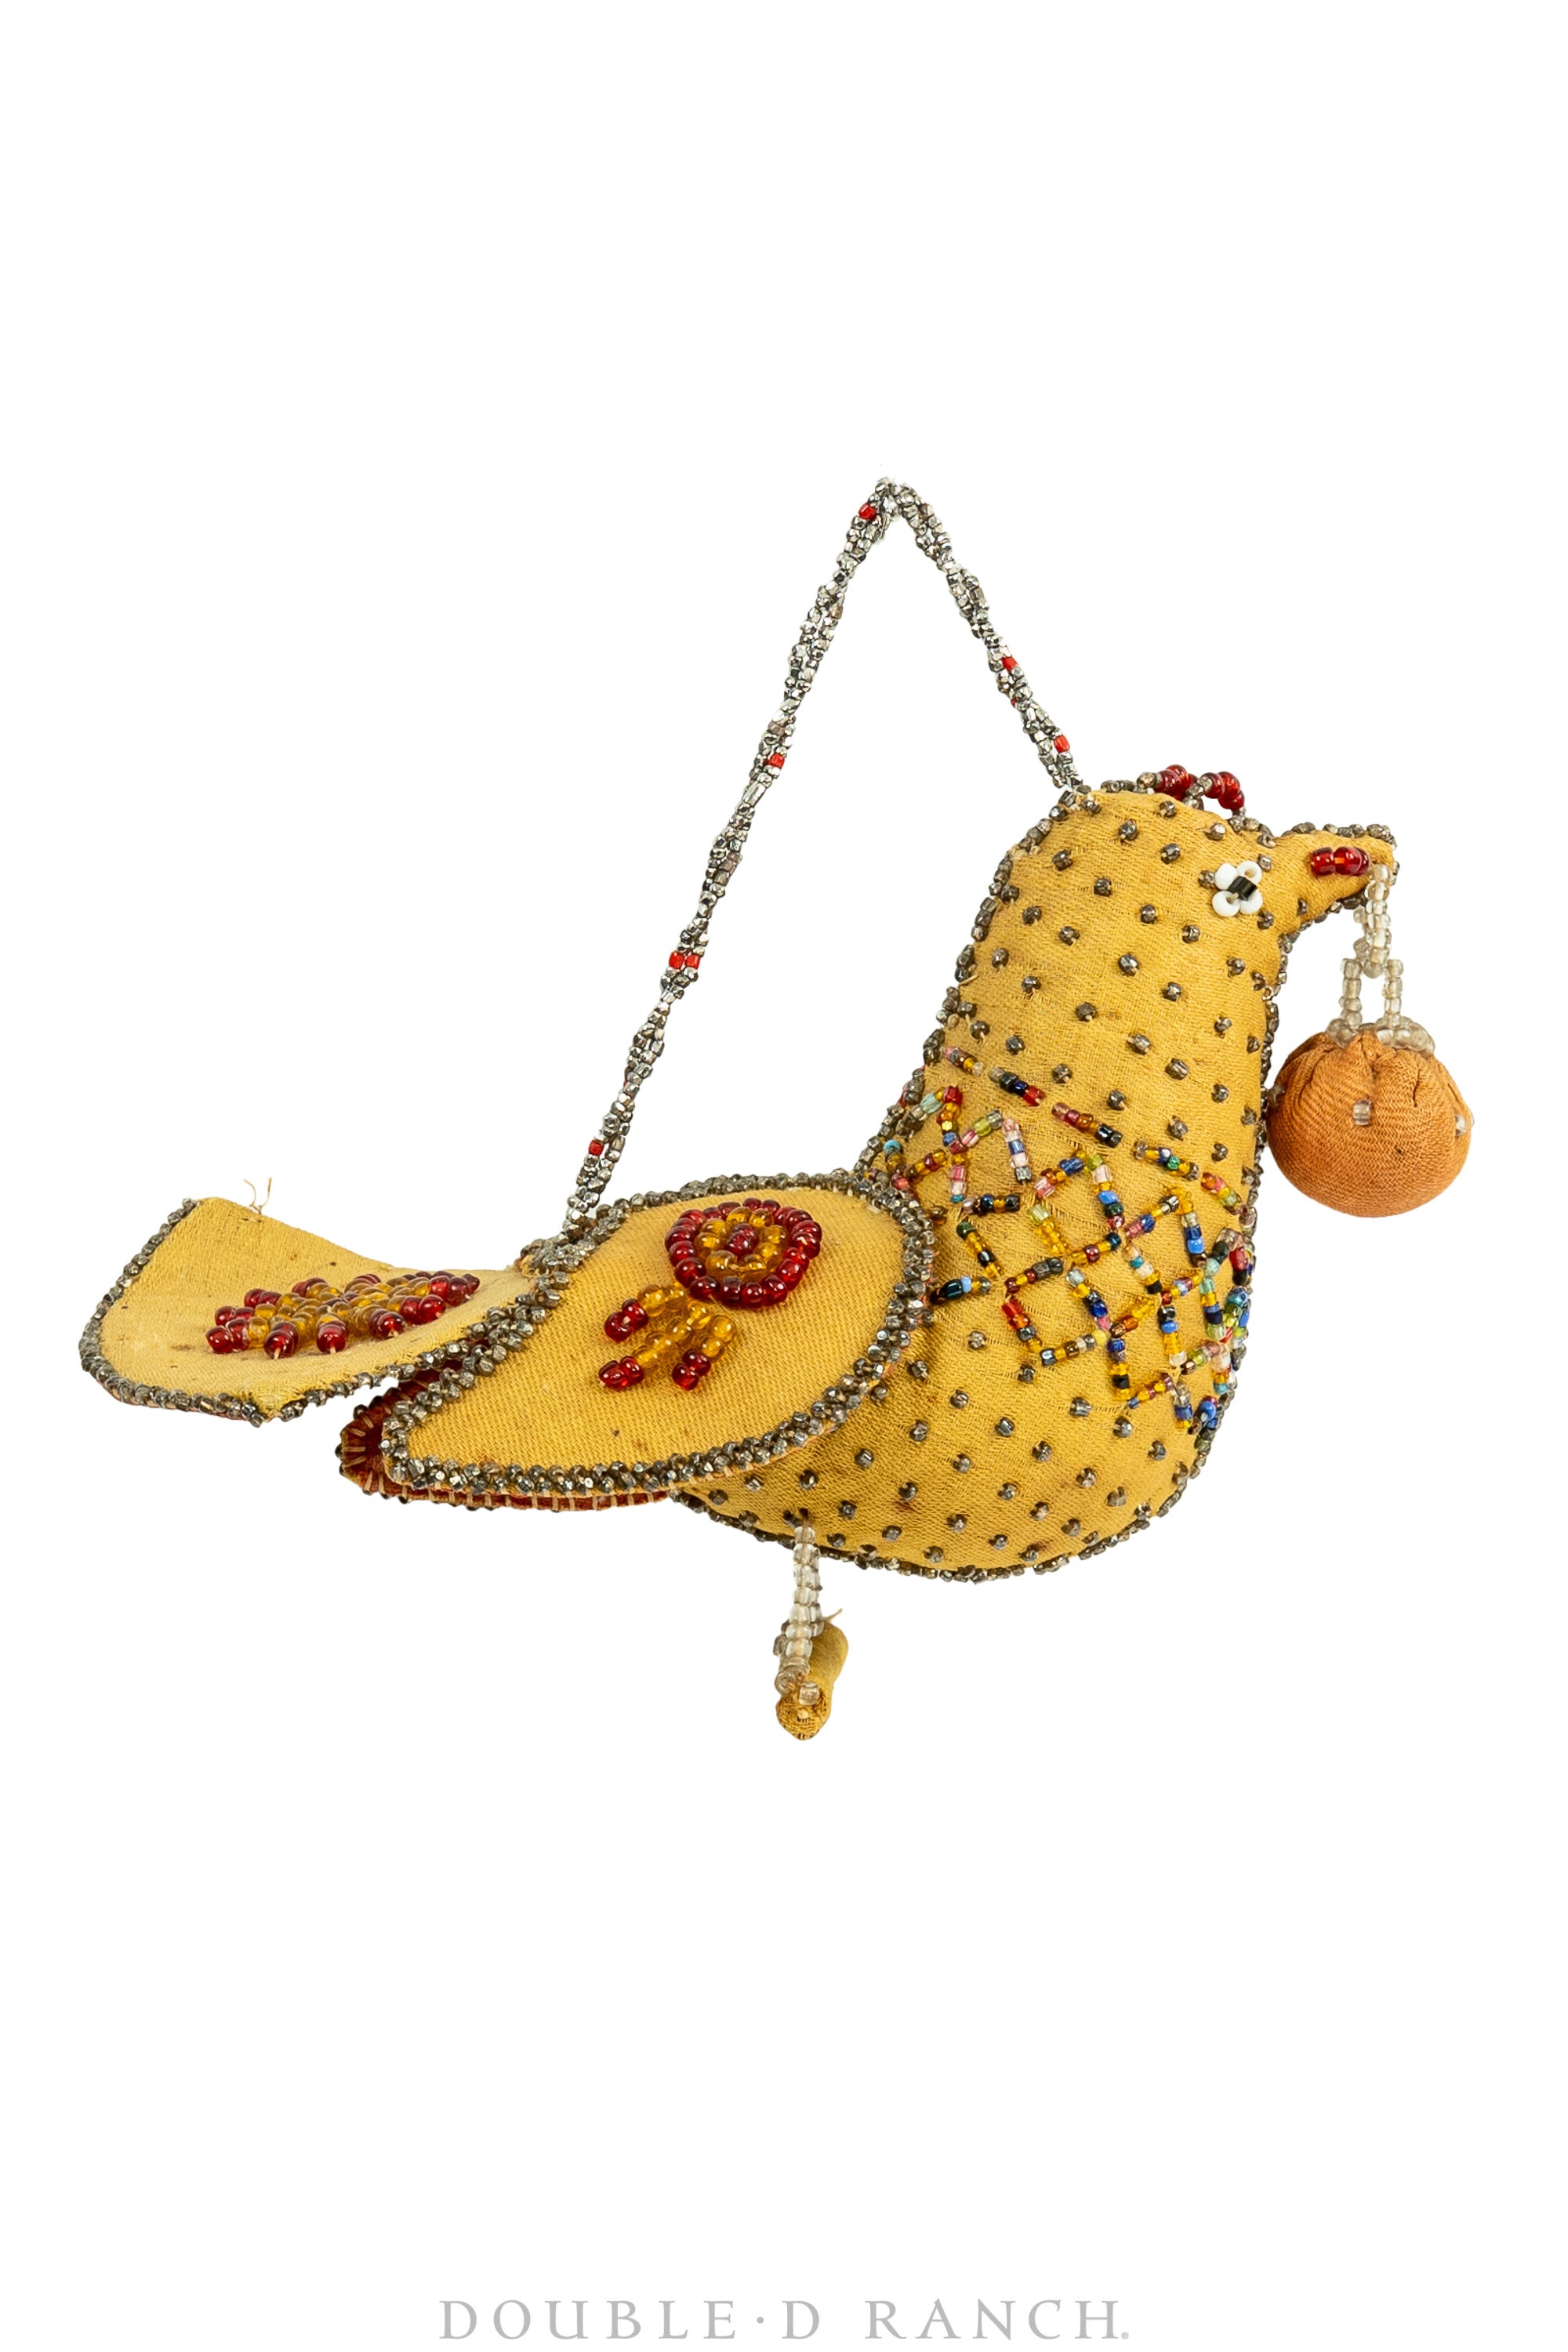 Whimsey, Bird with Cherry, Vintage, Late 19th Century, 308